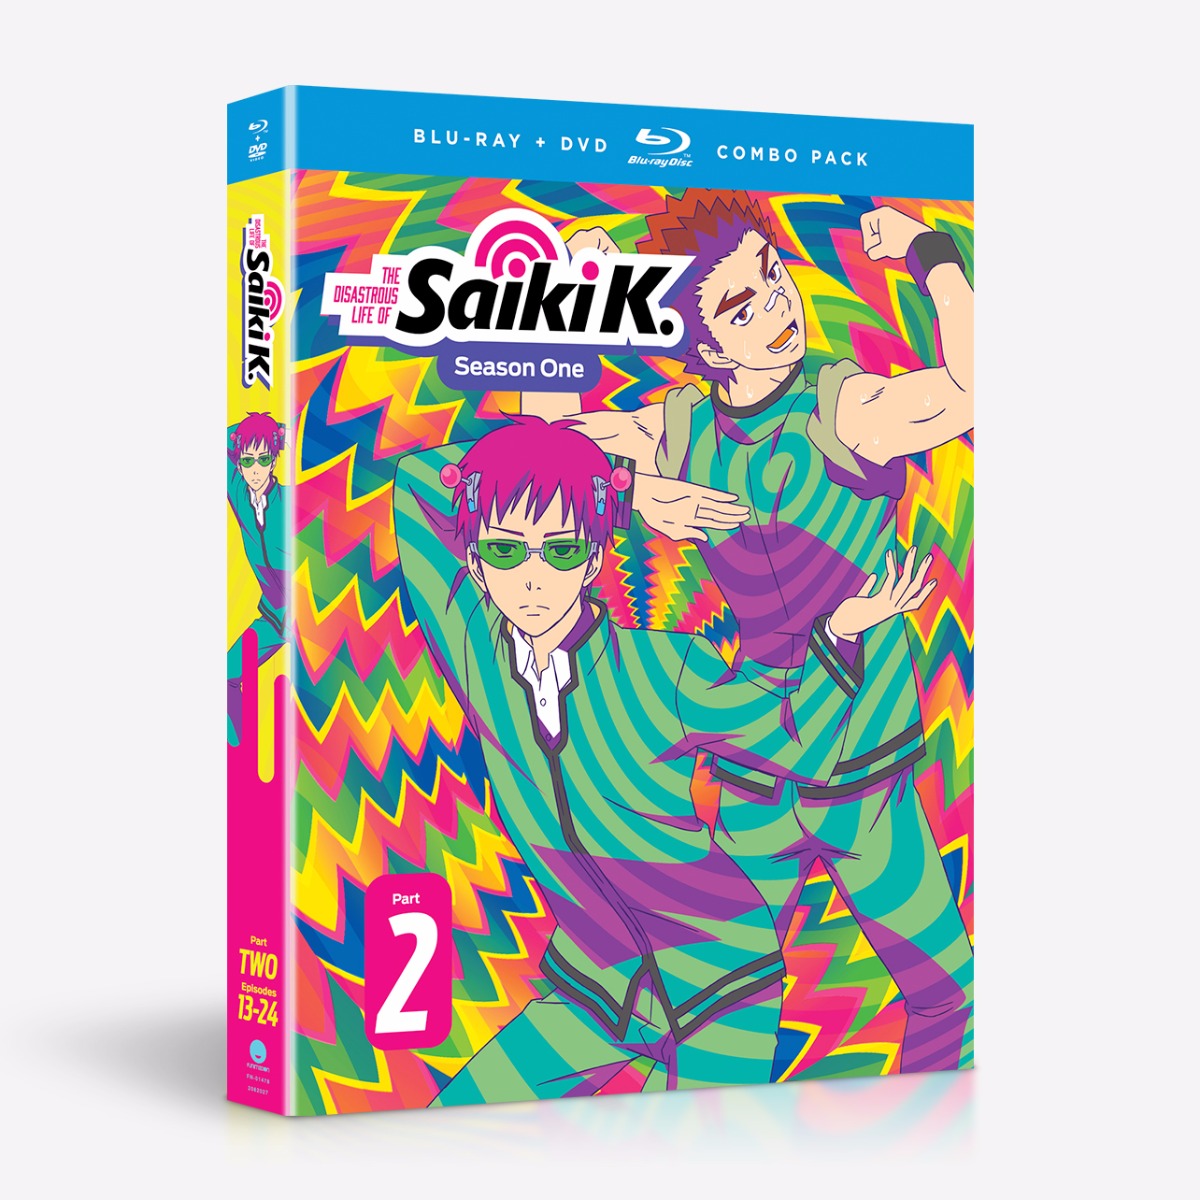 The Disastrous Life of Saiki K. - Part 2 - Blu-ray + DVD image count 0